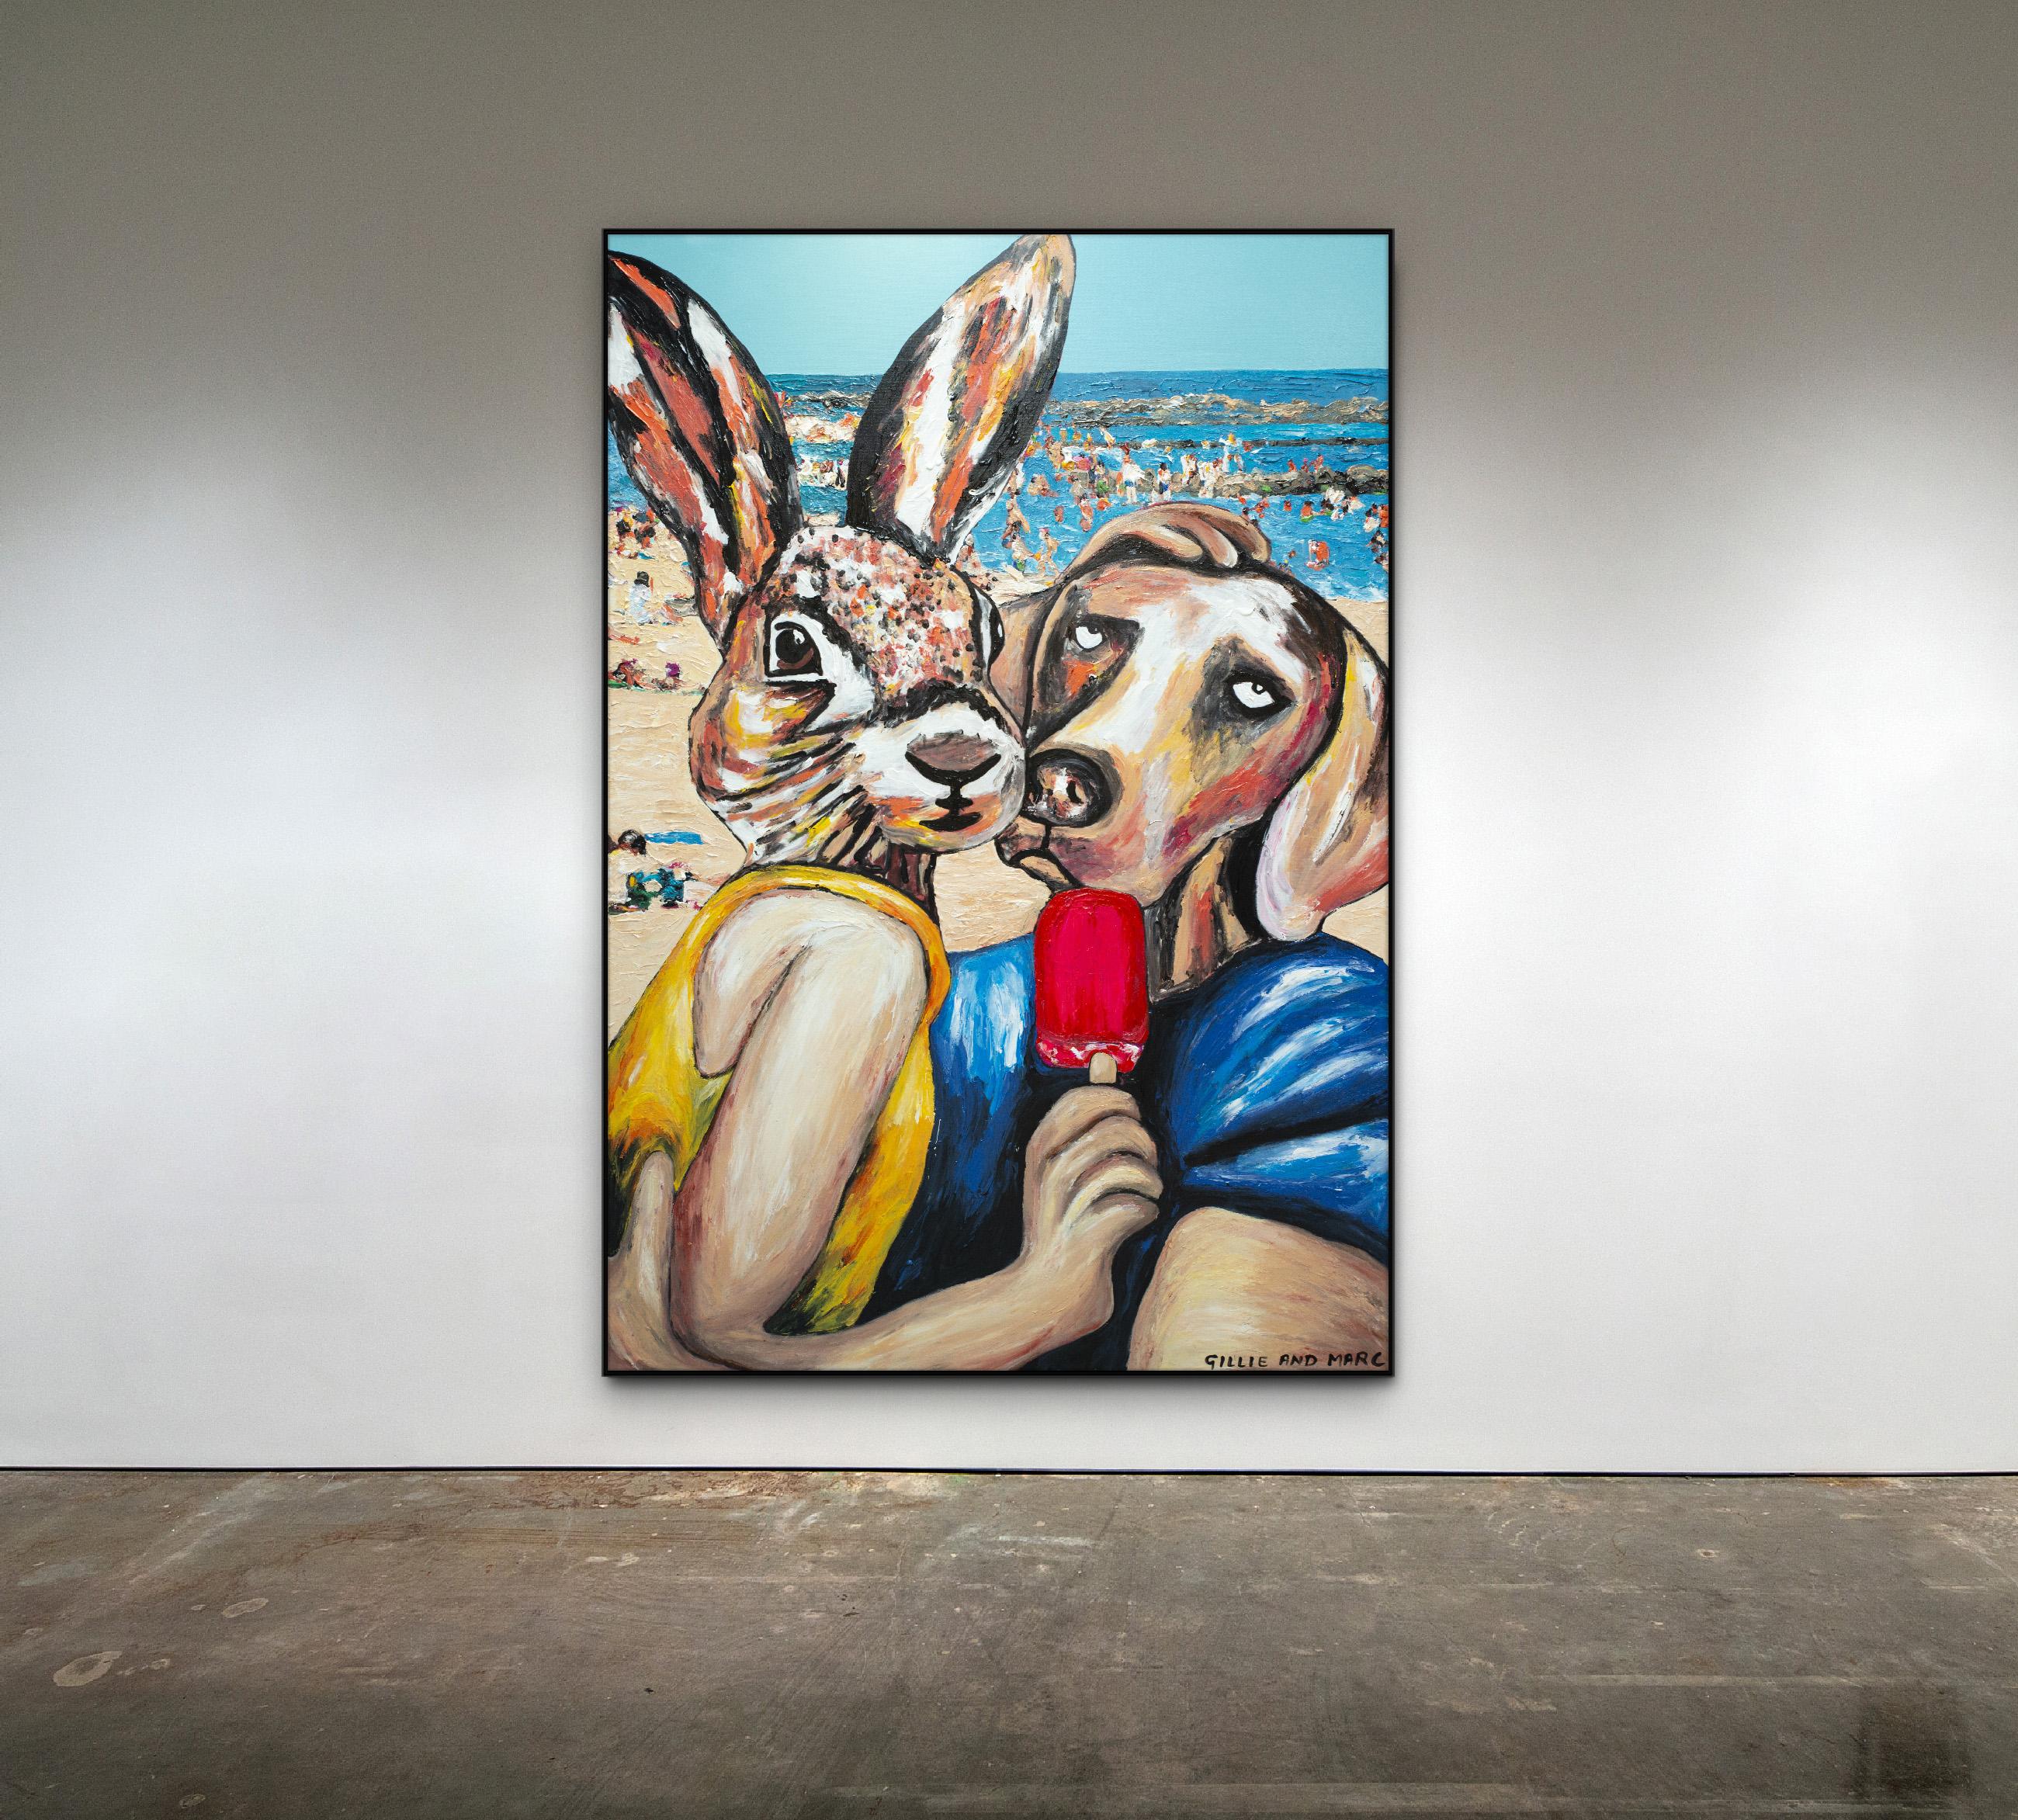 Original Animal Painting - Pop Art - Gillie and Marc - Dog - Rabbit - Beach Kiss - Beige Figurative Painting by Gillie and Marc Schattner